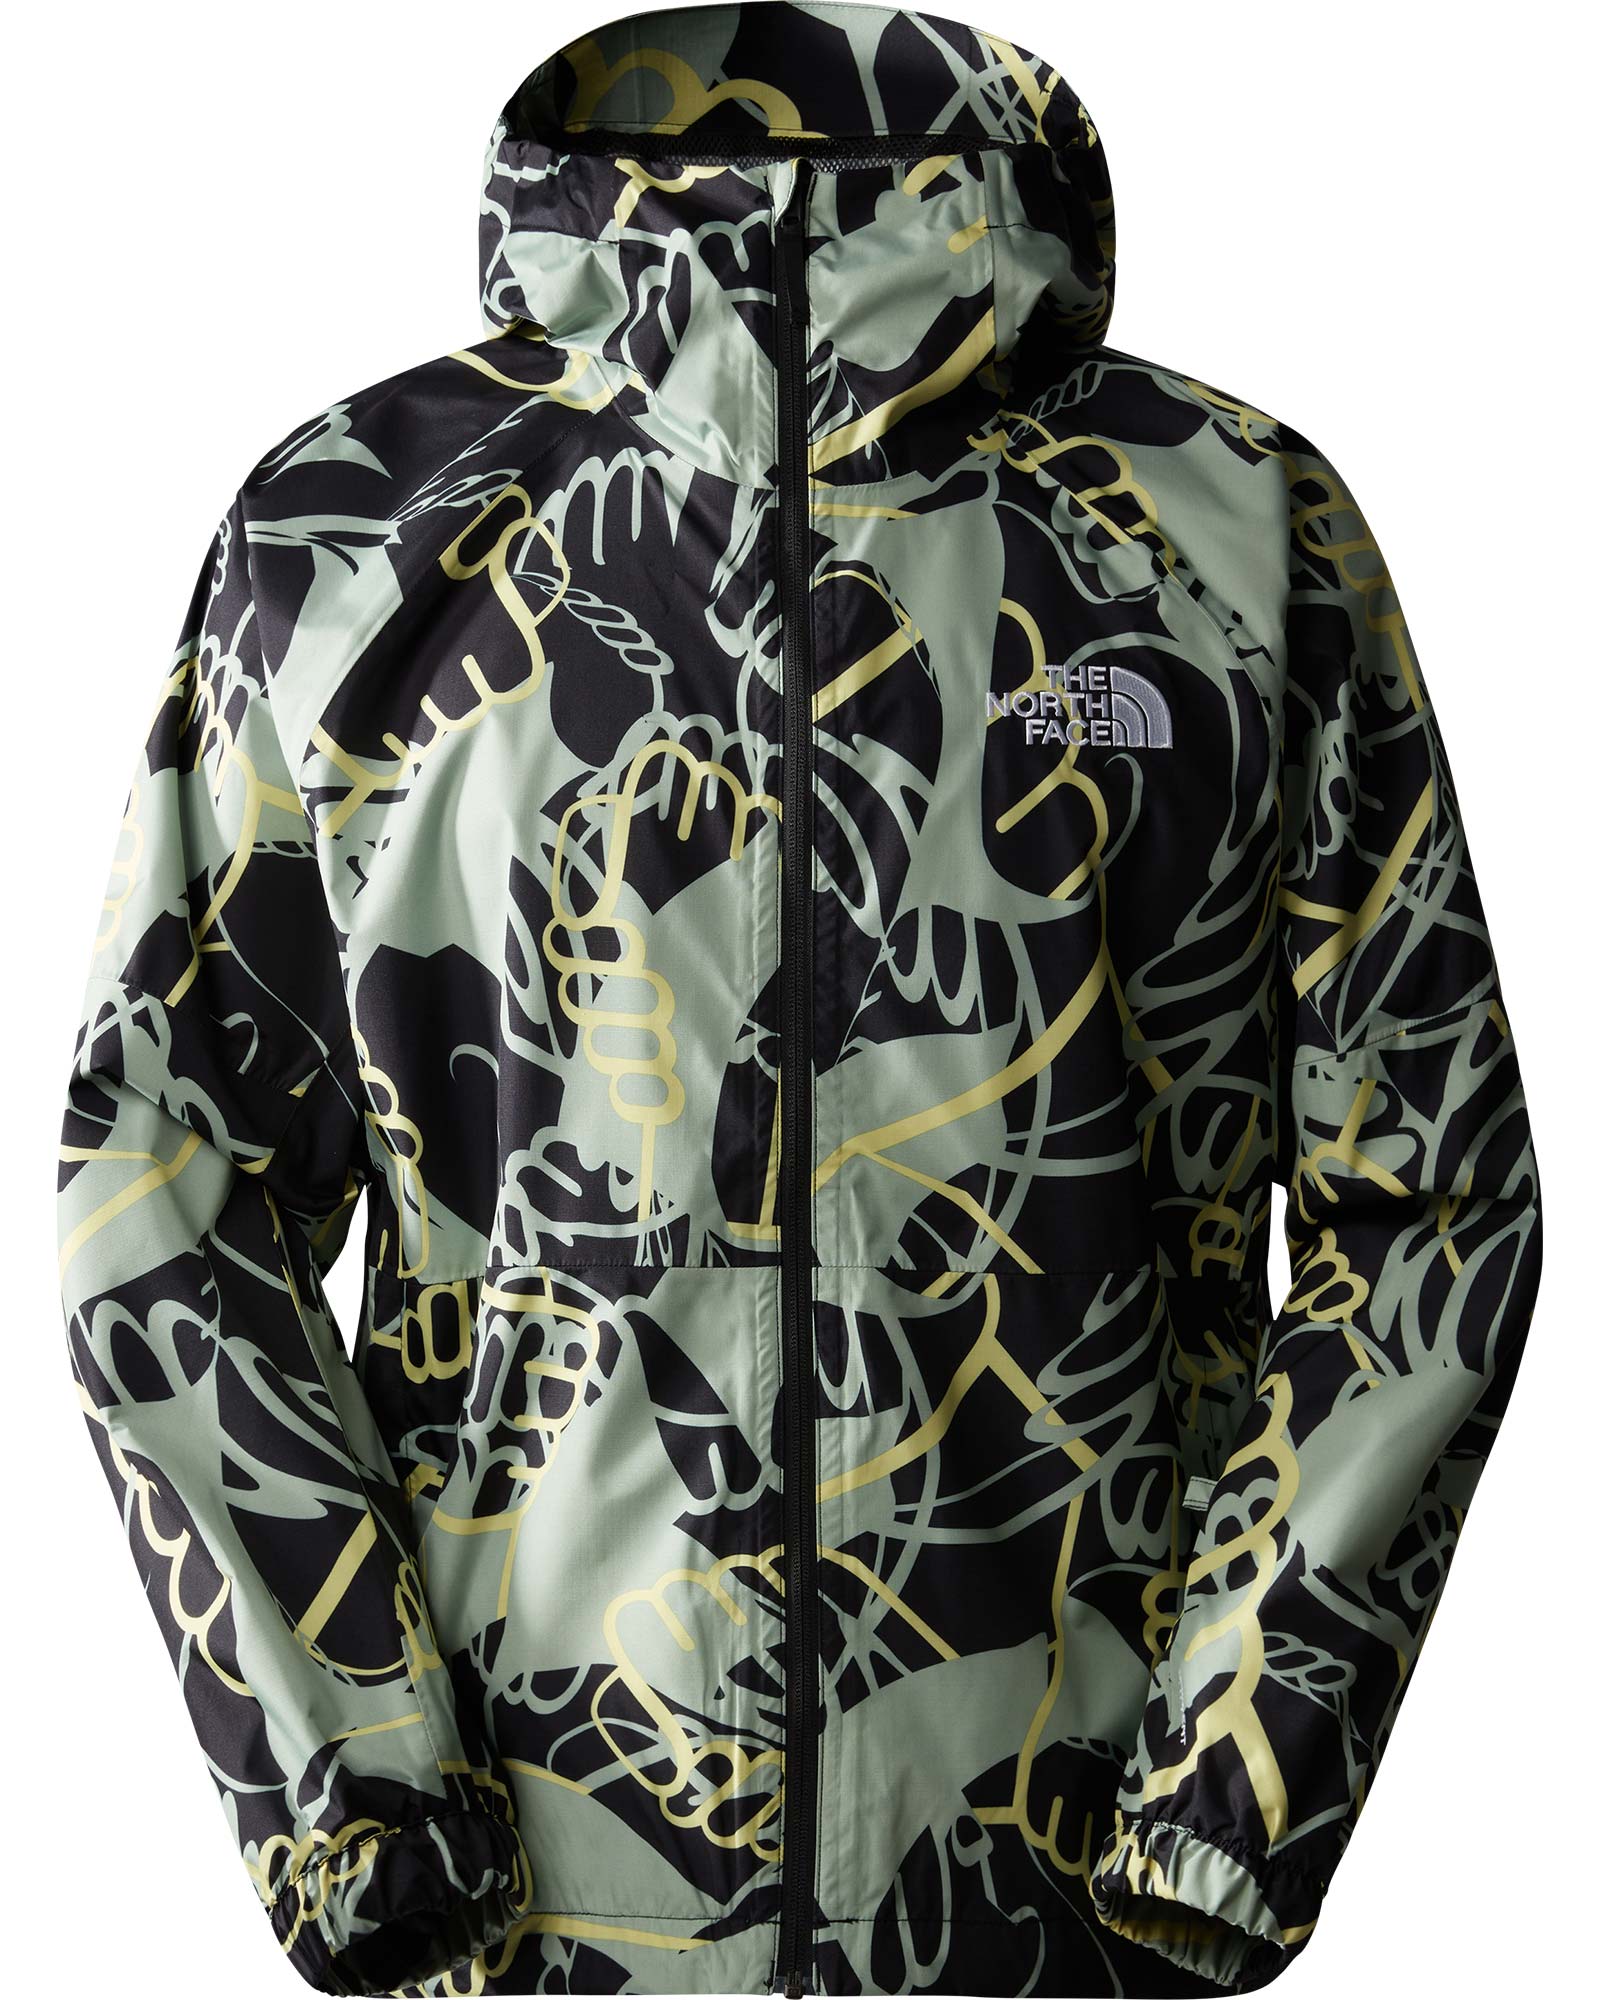 The North Face Build Up Women’s Jacket - TNF Black Hands Print XS